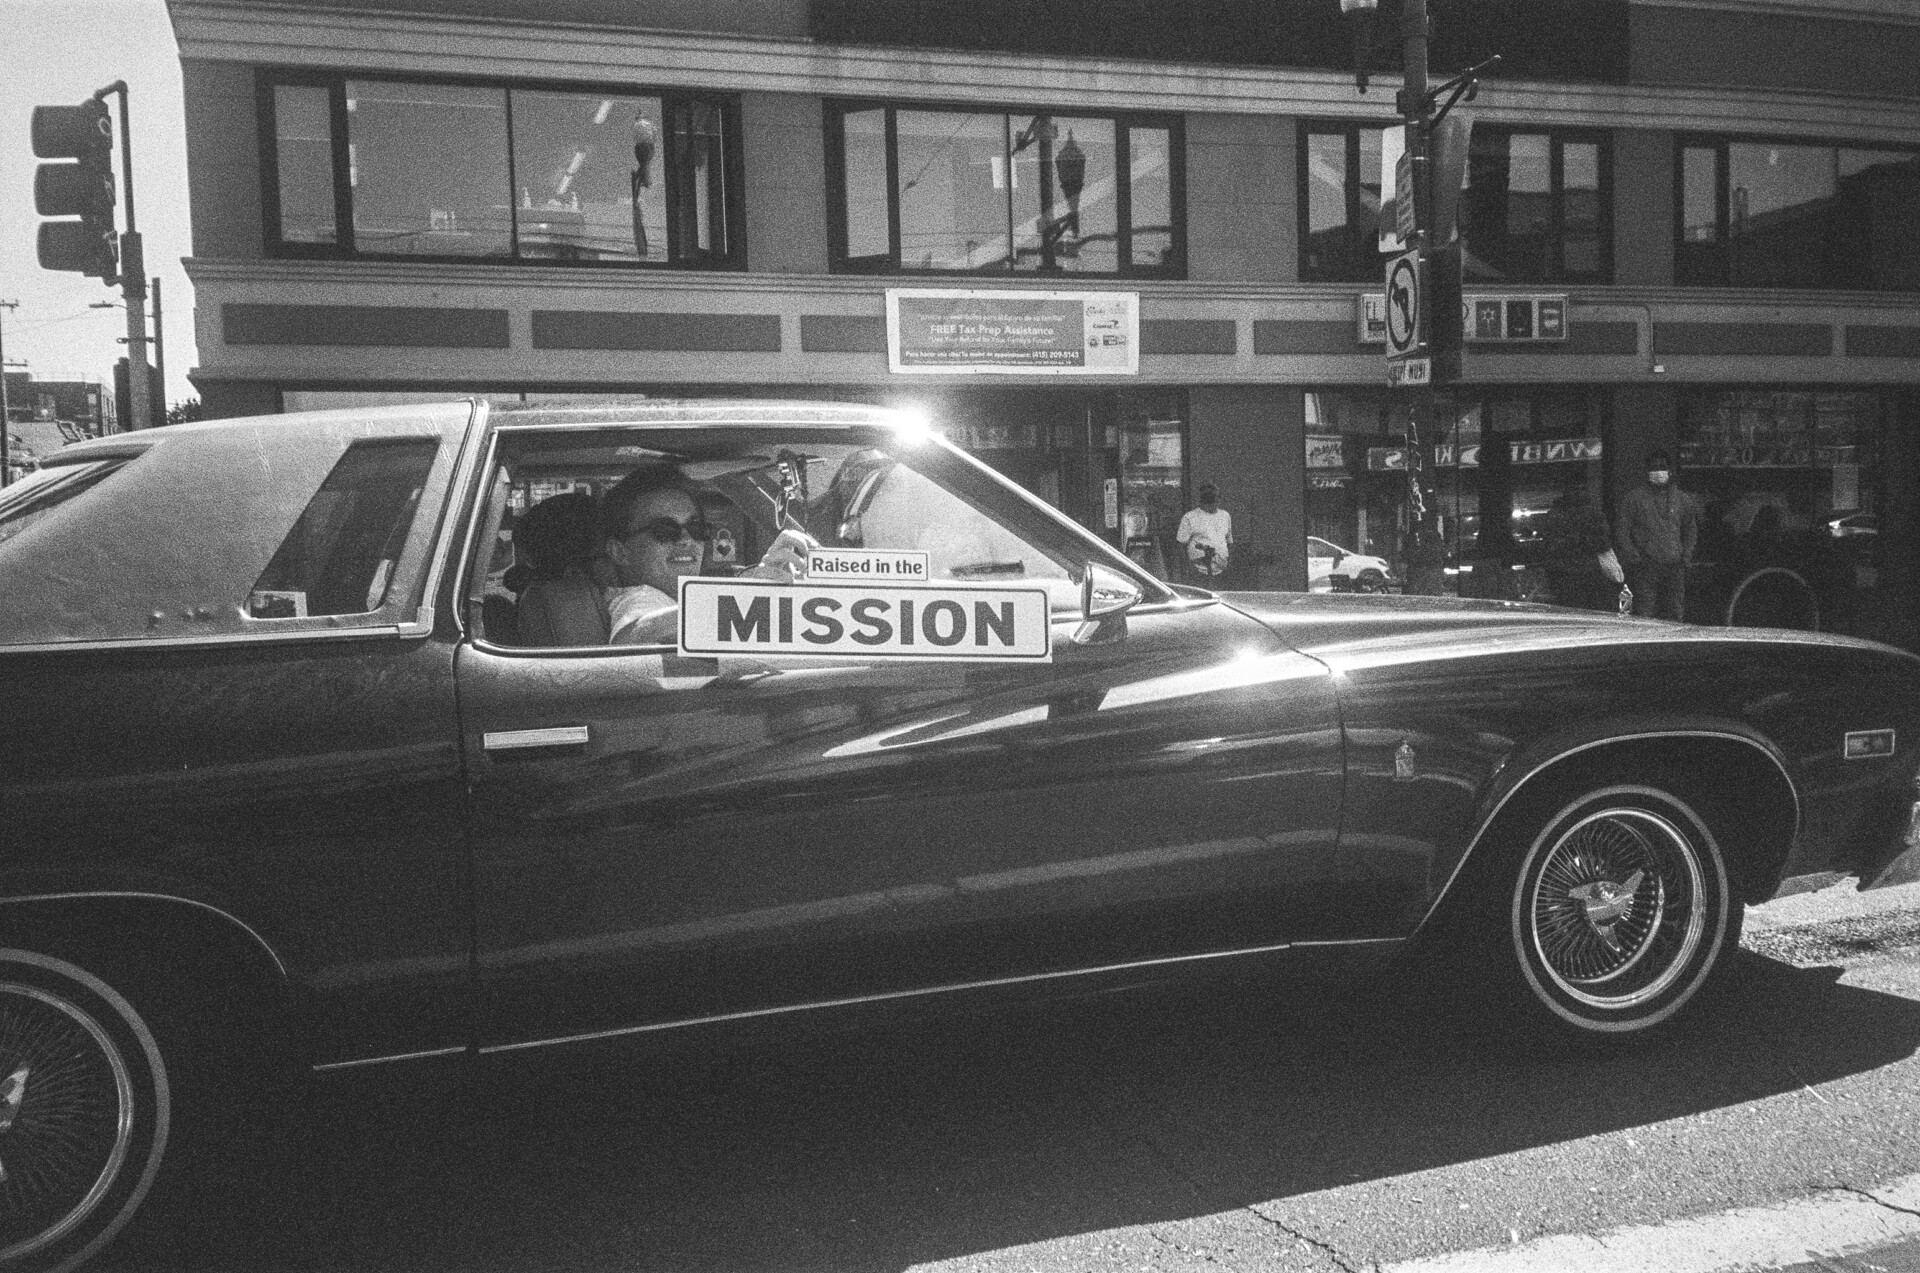 A woman proudly holds a Mission street sign outside of the passenger window of a lowrider car.